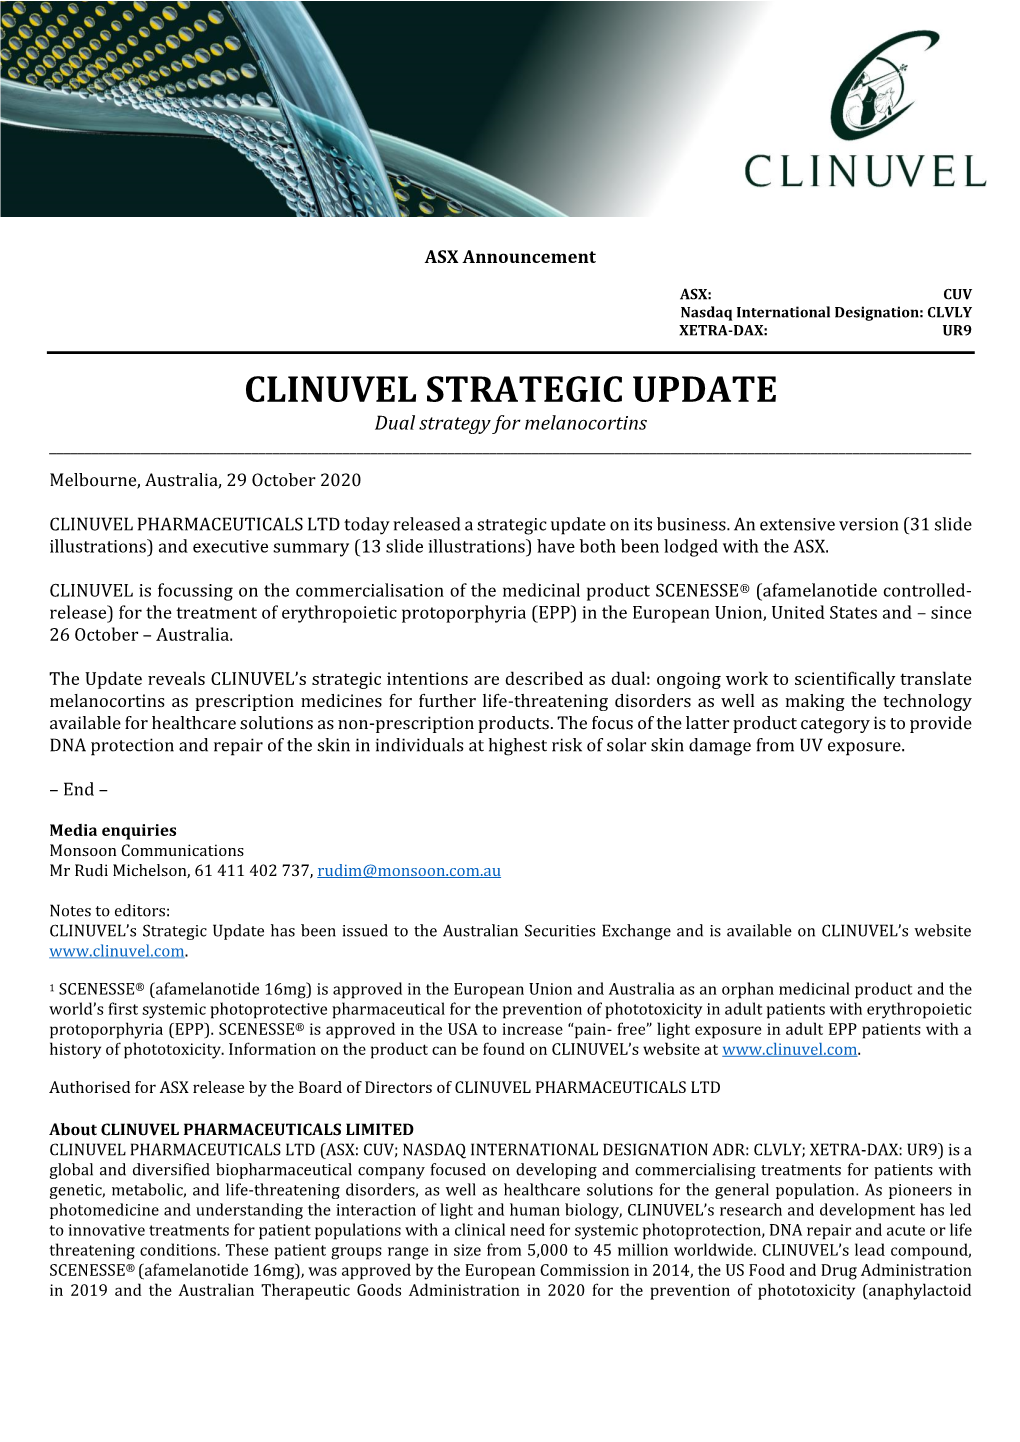 CLINUVEL STRATEGIC UPDATE Dual Strategy for Melanocortins ______